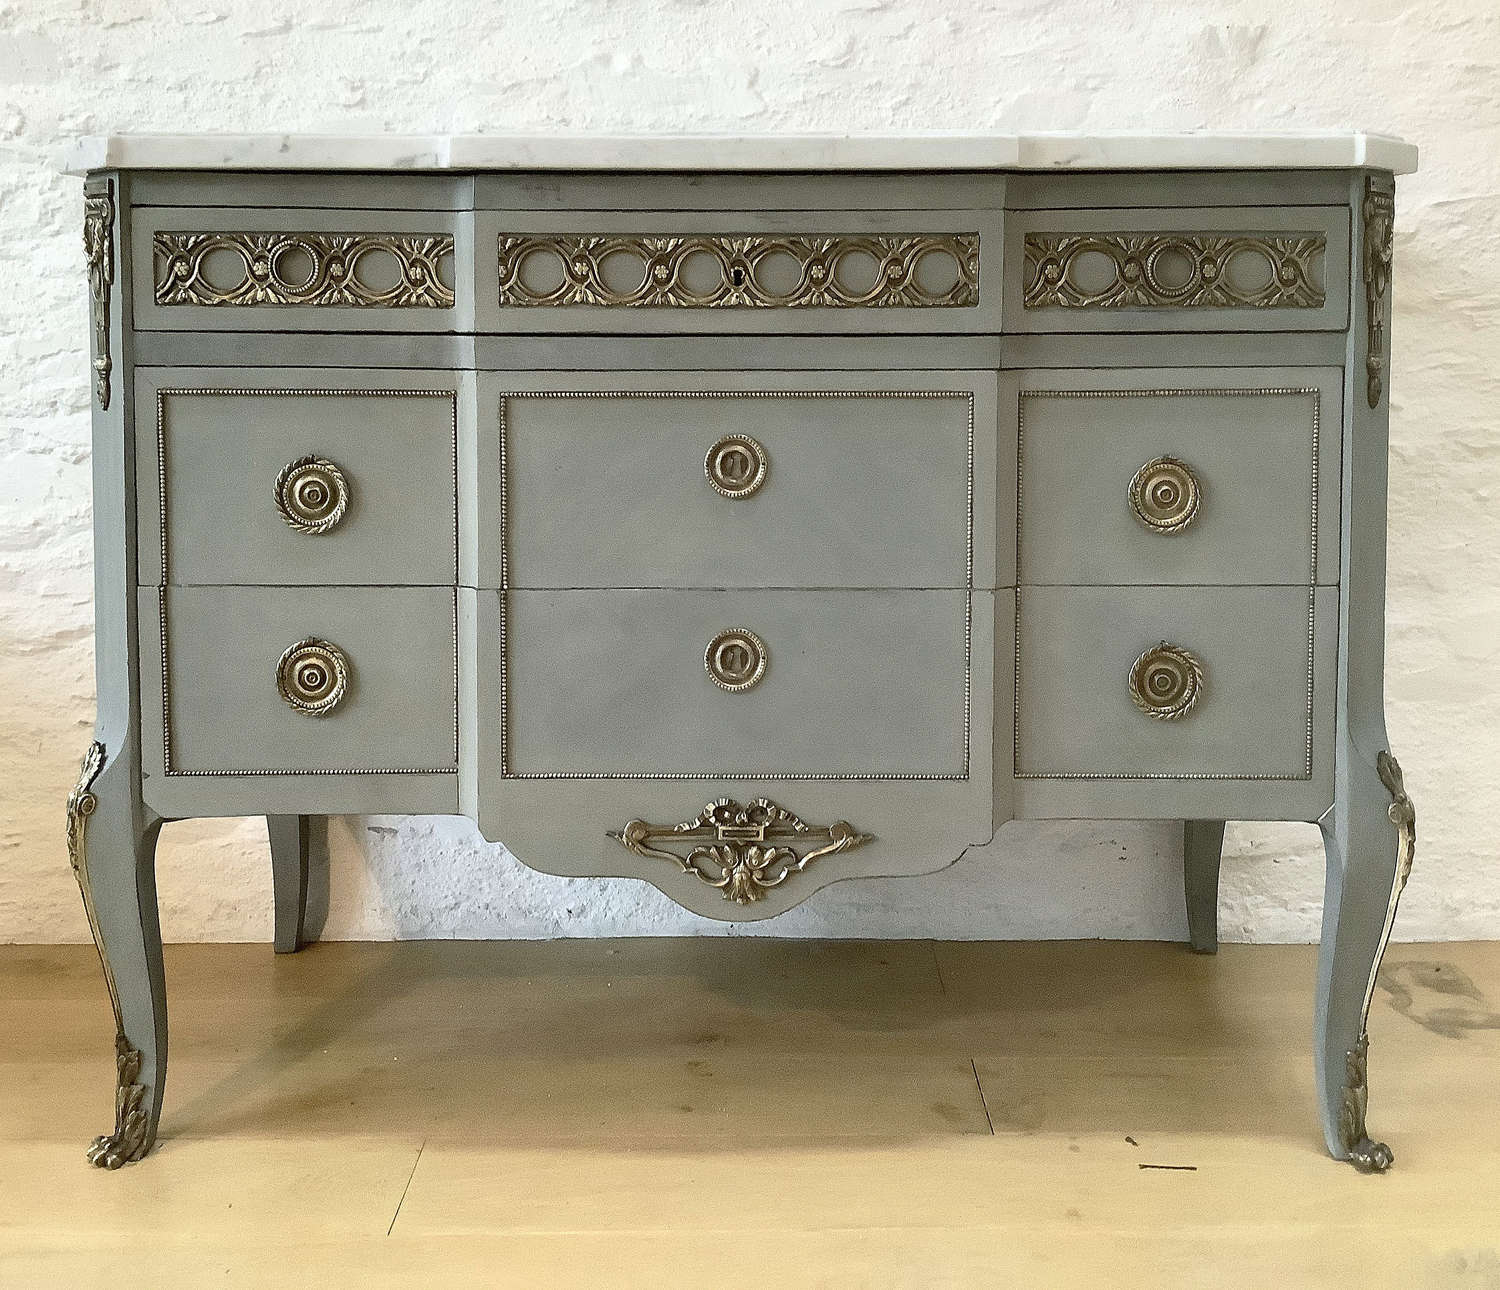 Louis XVI Transitional style commode c1900-20